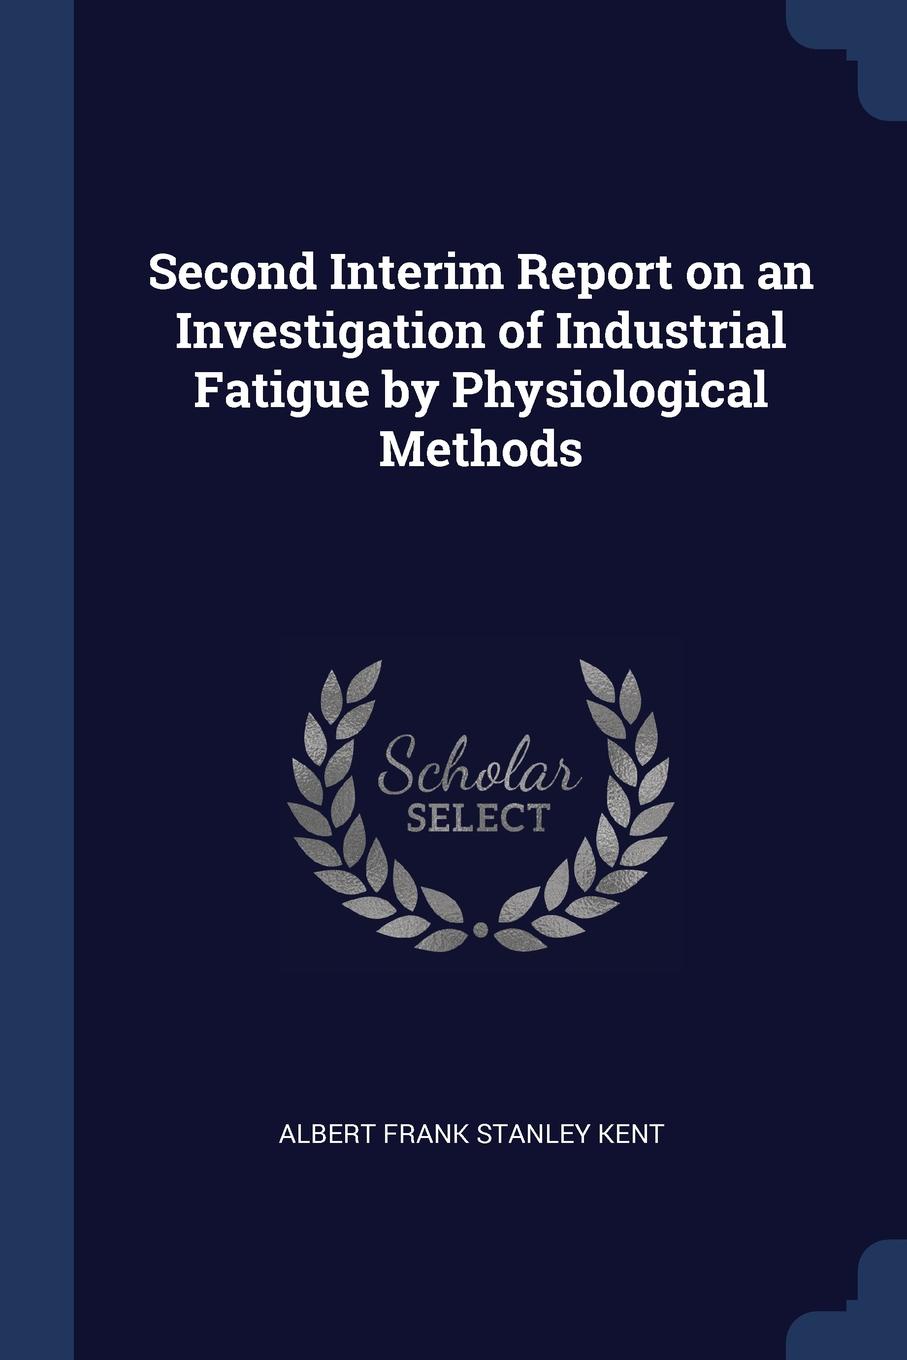 Second Interim Report on an Investigation of Industrial Fatigue by Physiological Methods